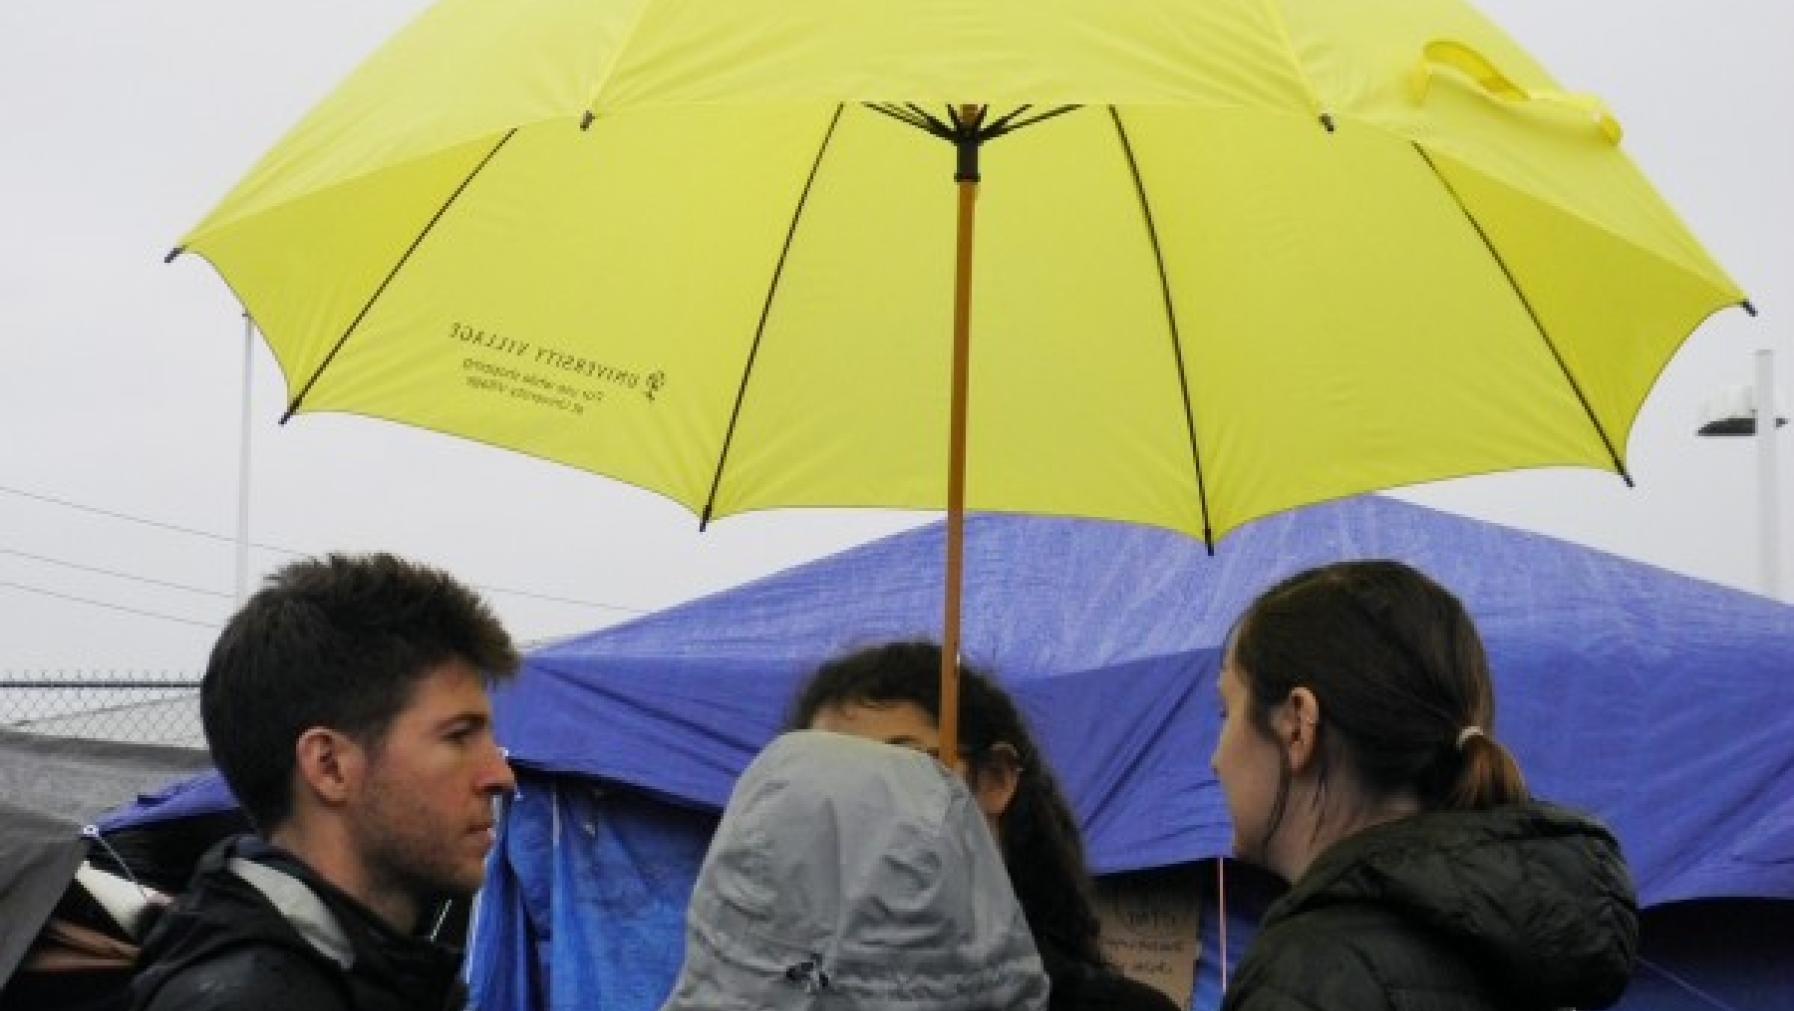 Four people standing under an umbrella.